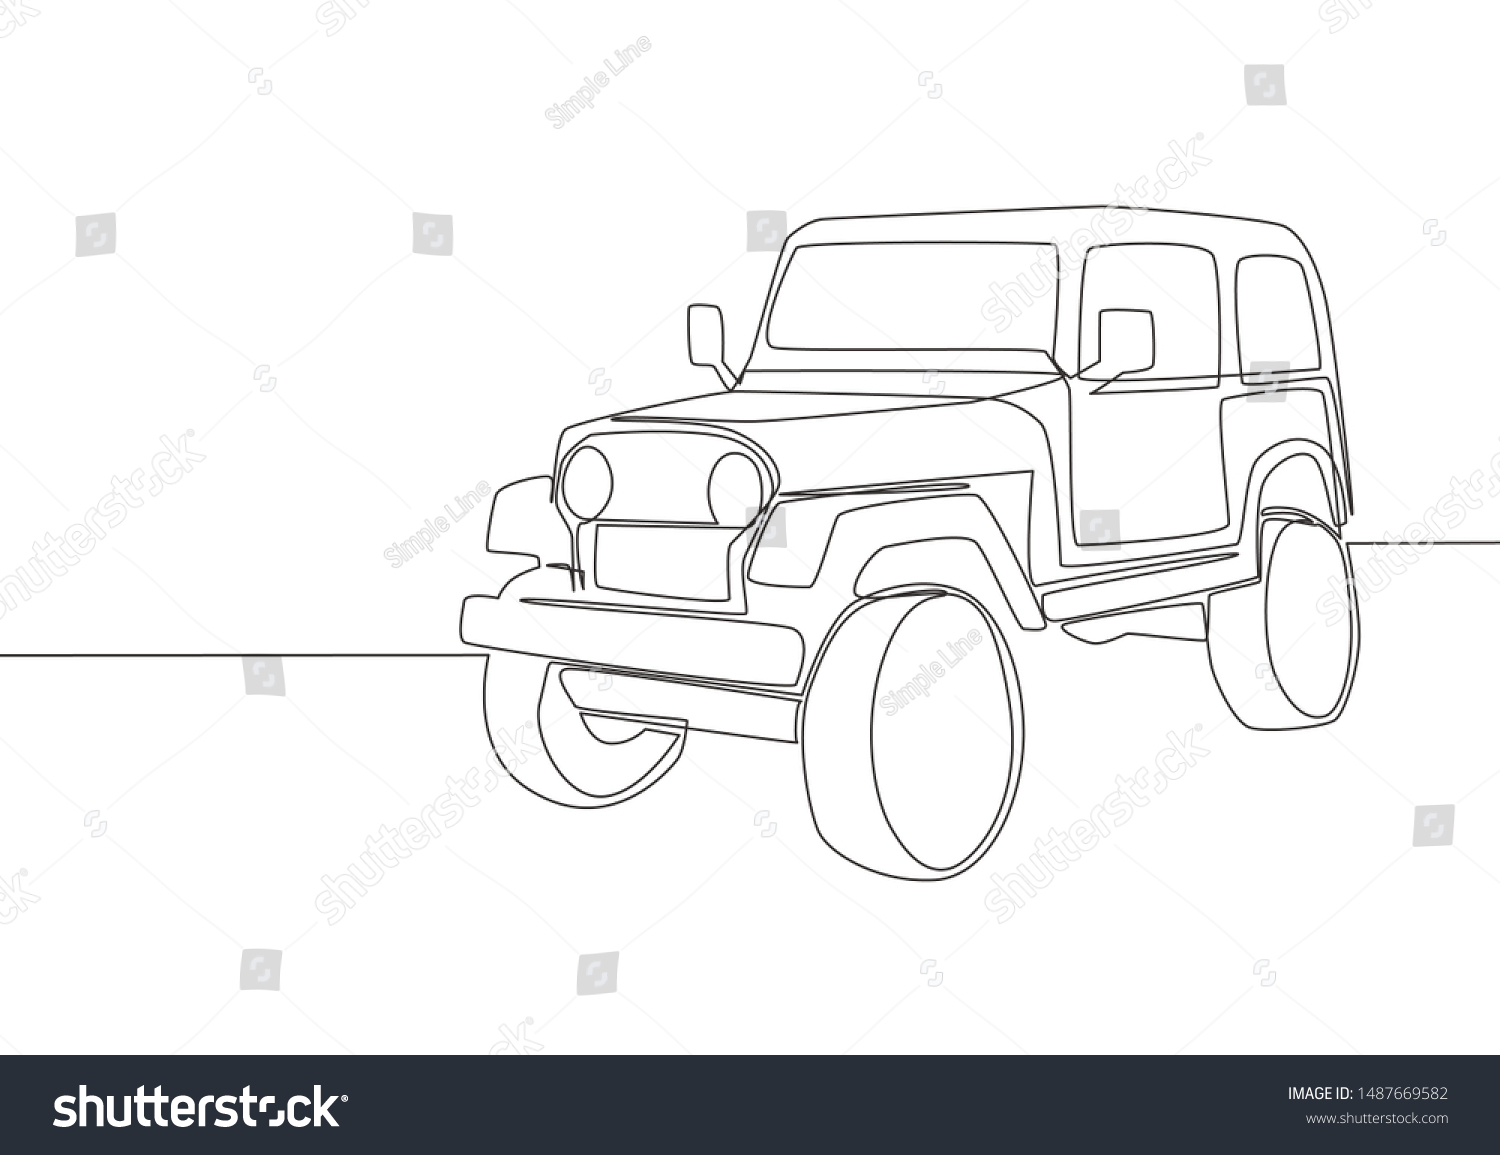 SVG of Single line drawing of 4x4 speed wrangler jeep car. Offroad adventure rally vehicle transportation concept. One continuous line draw design svg